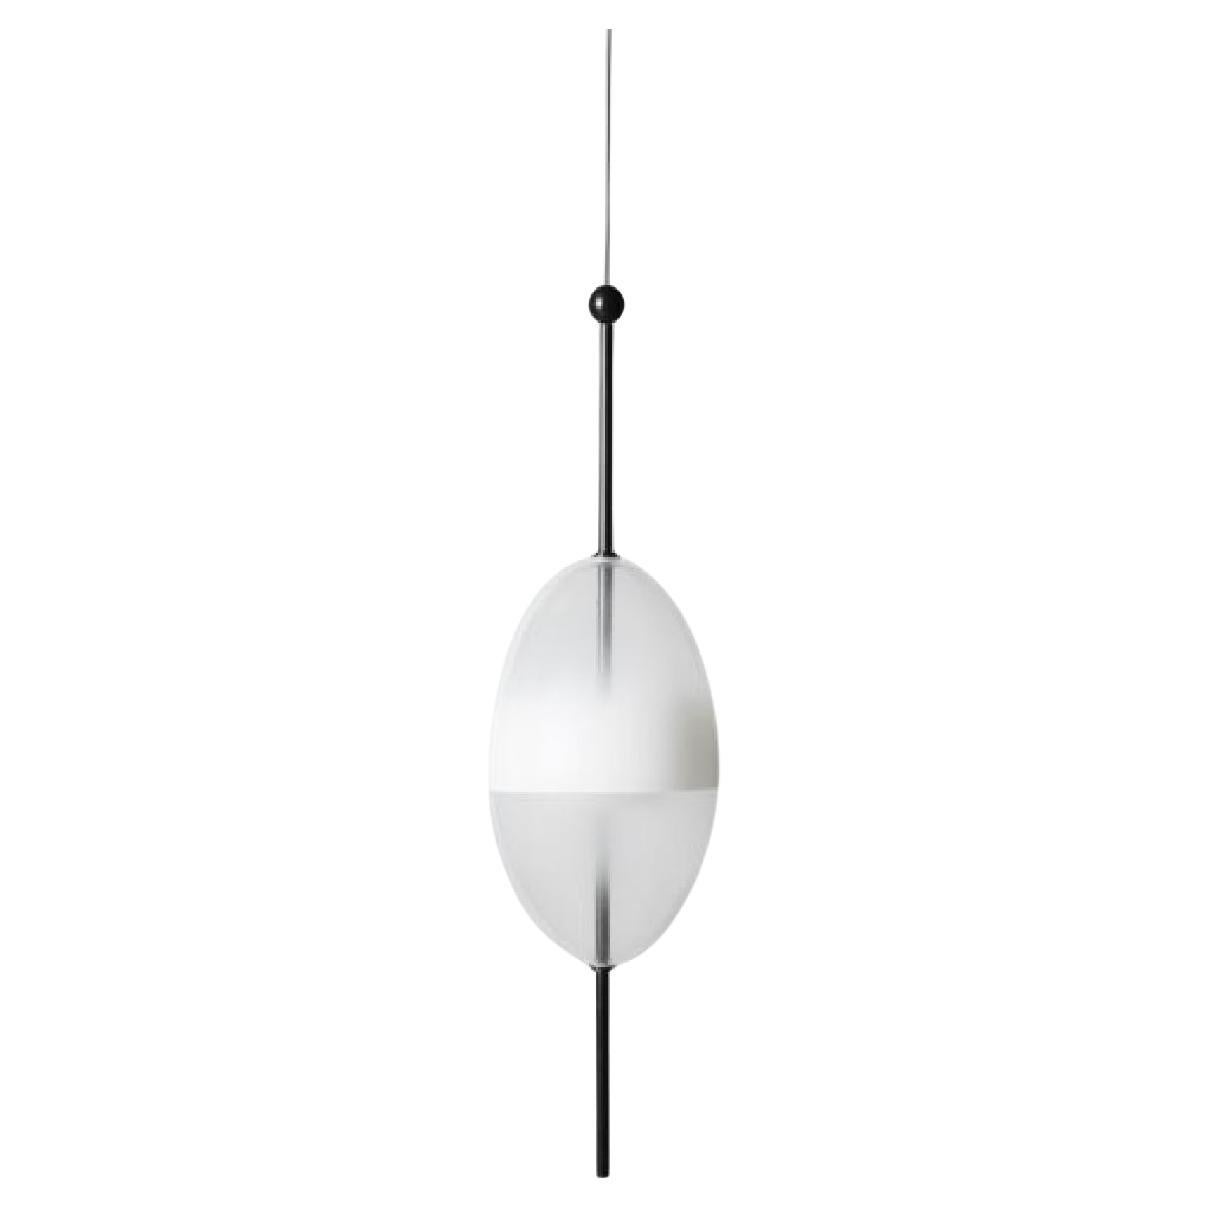 FLOW[T] S1 Pendant lamp in White by Nao Tamura for Wonderglass For Sale